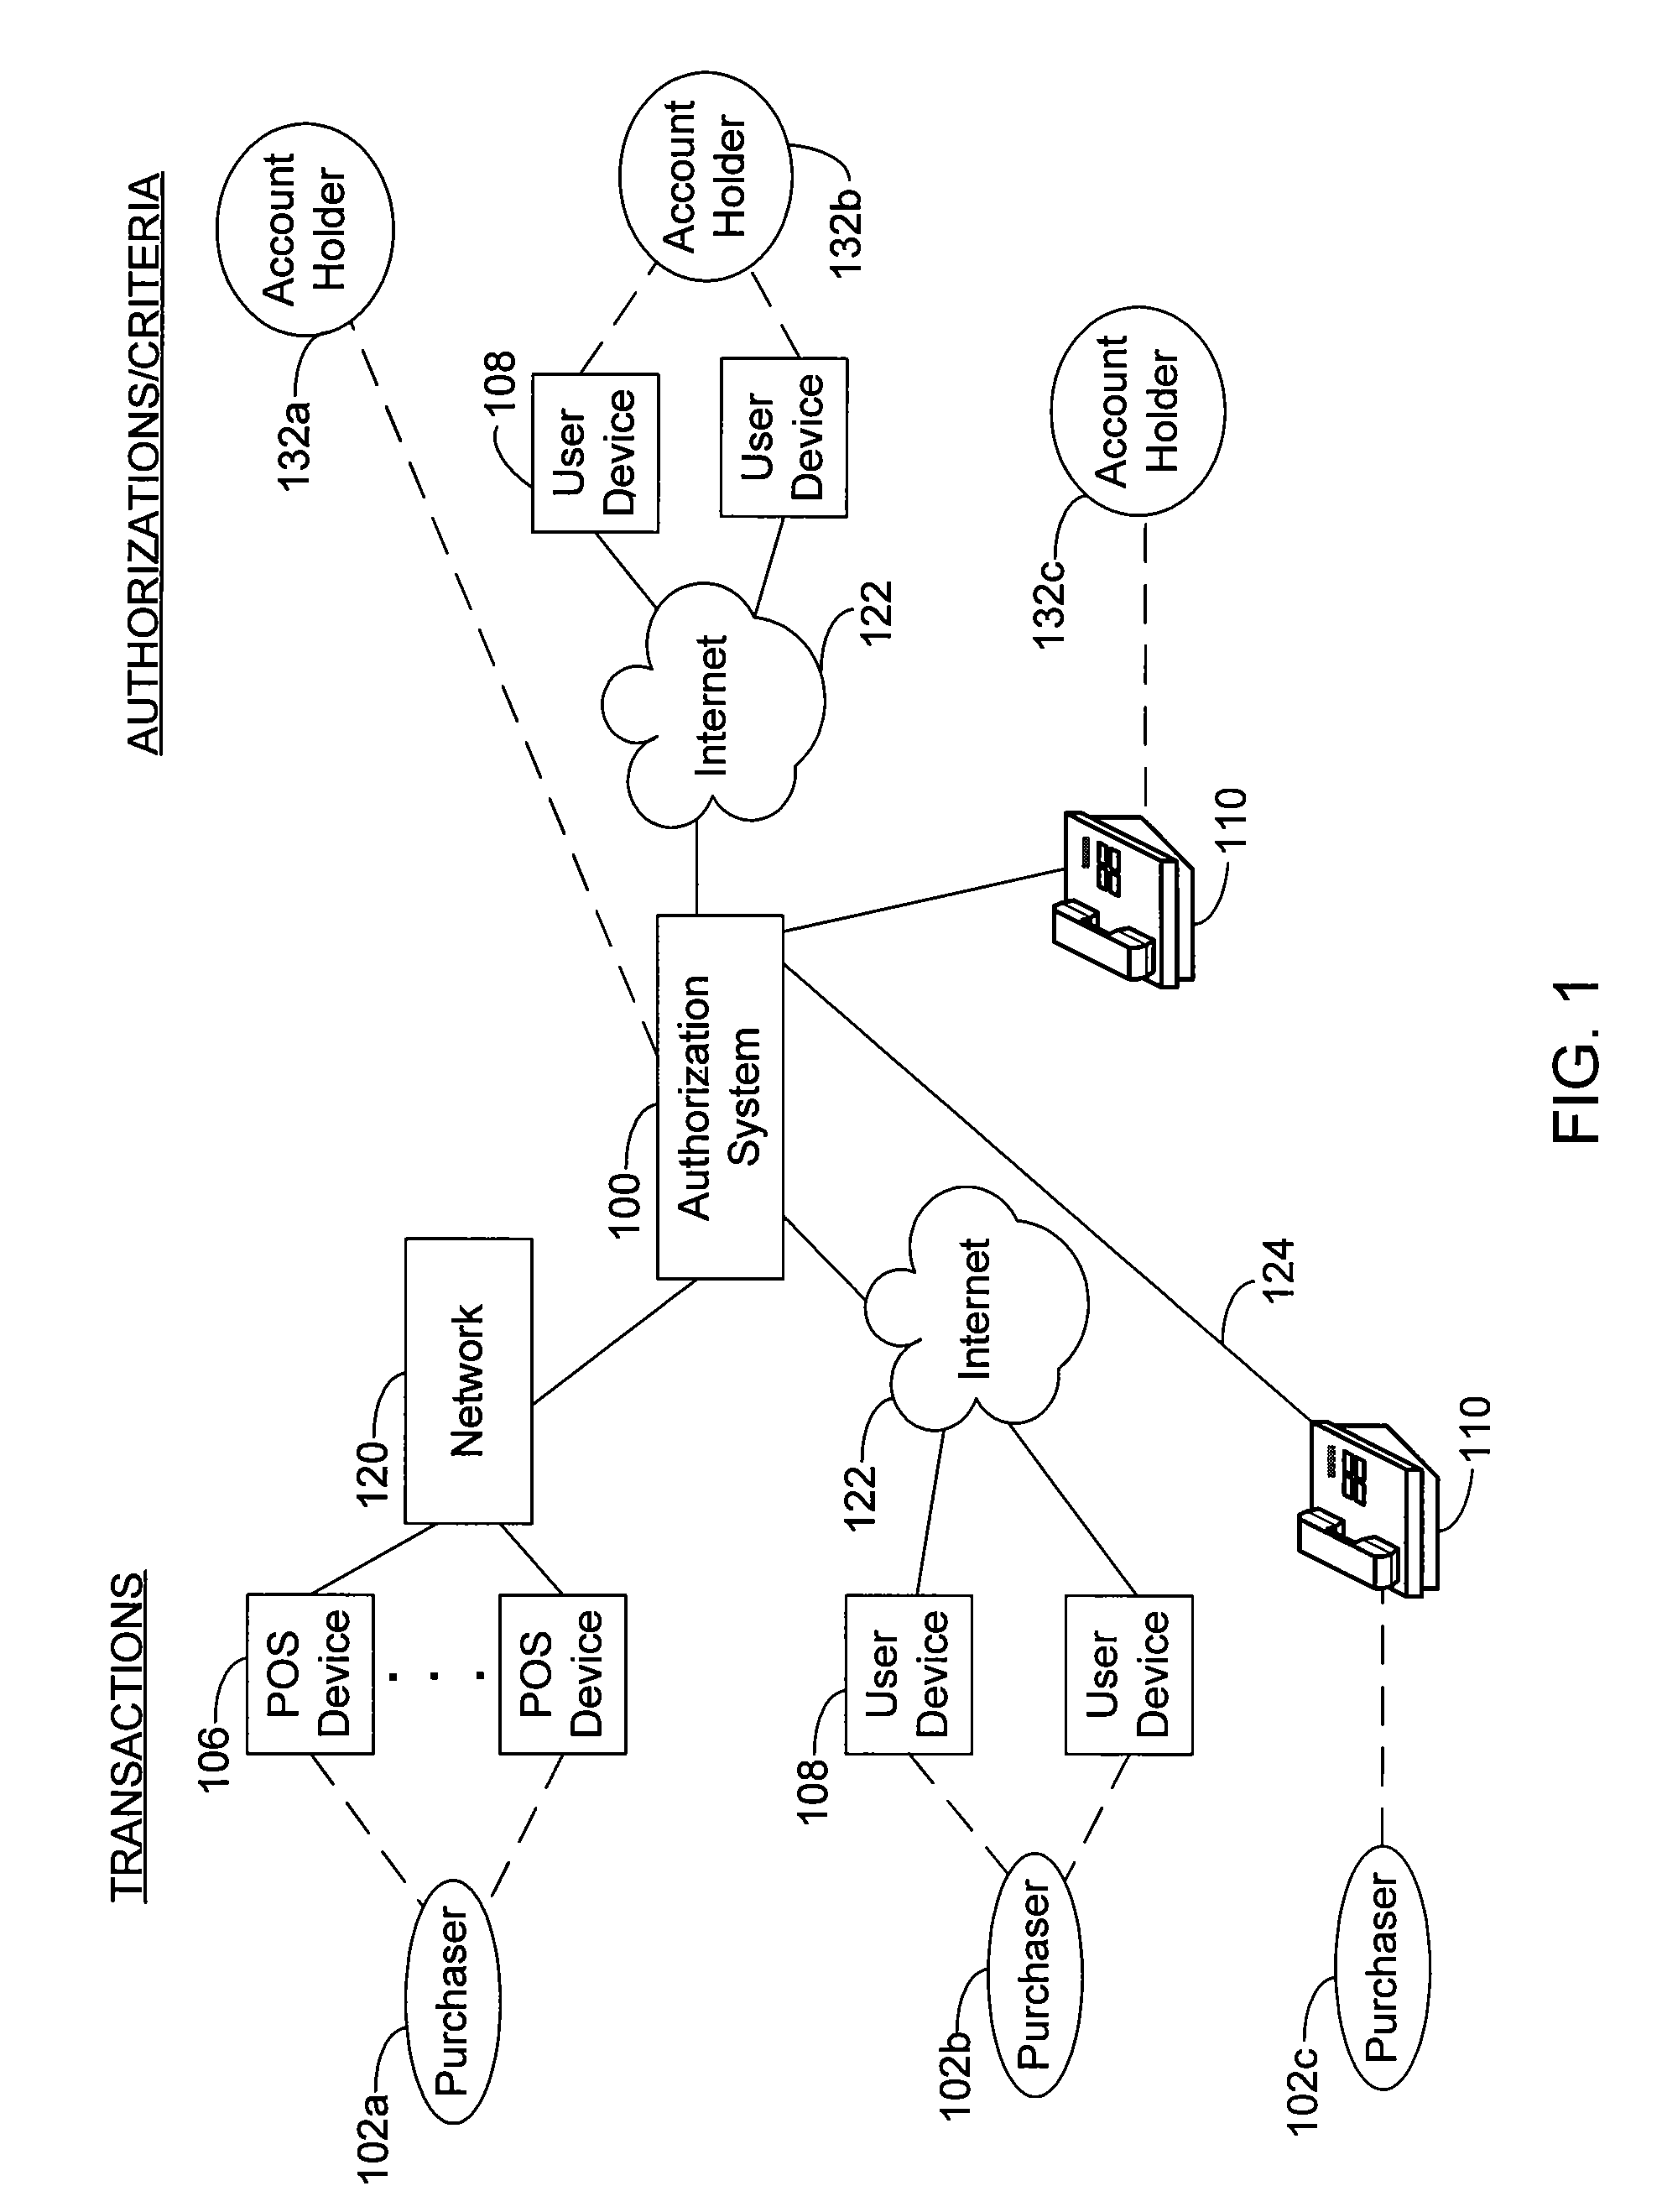 System and method for card not present transactions